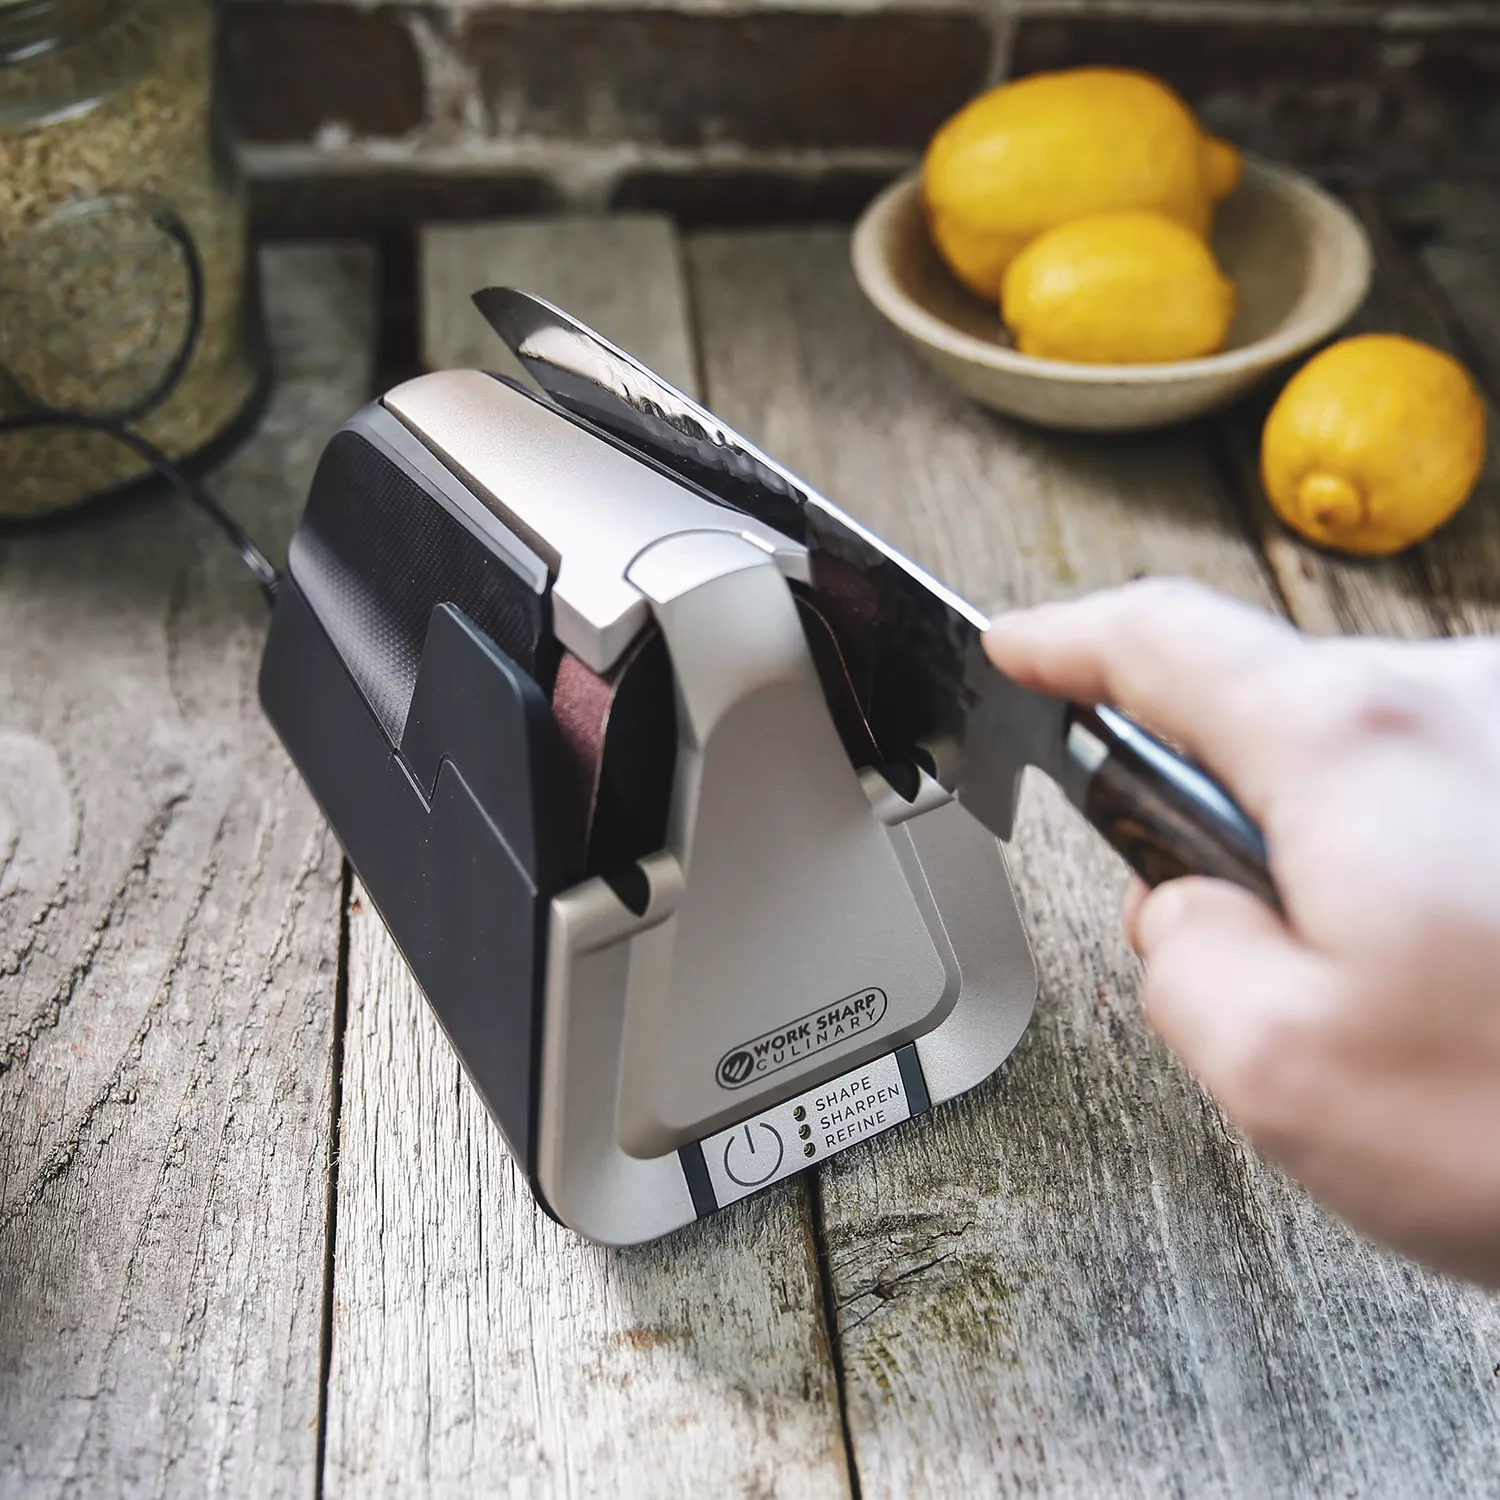 Work Sharp Culinary E5 Kitchen Knife Sharpener Review: Excellent Edges